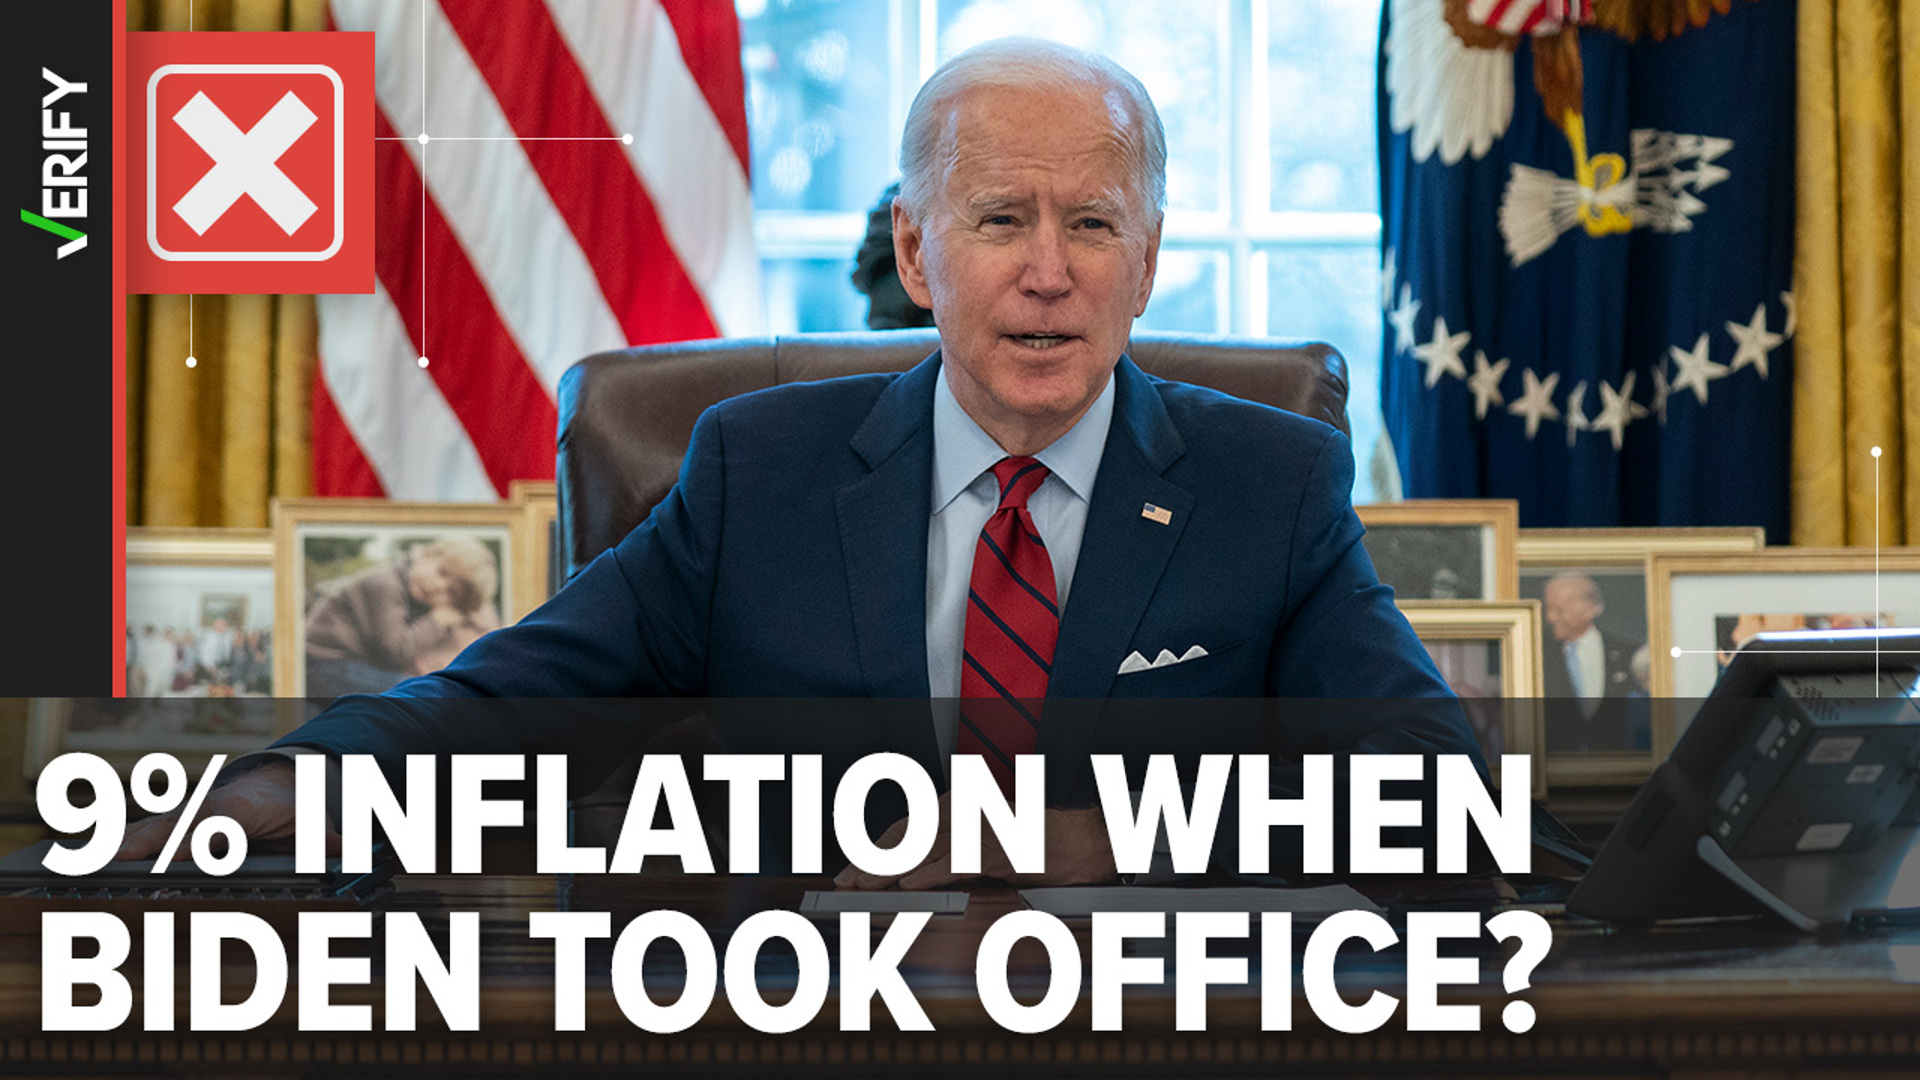 President Joe Biden falsely claimed in two recent interviews that inflation was 9% when he took office in January 2021. It was actually much lower.